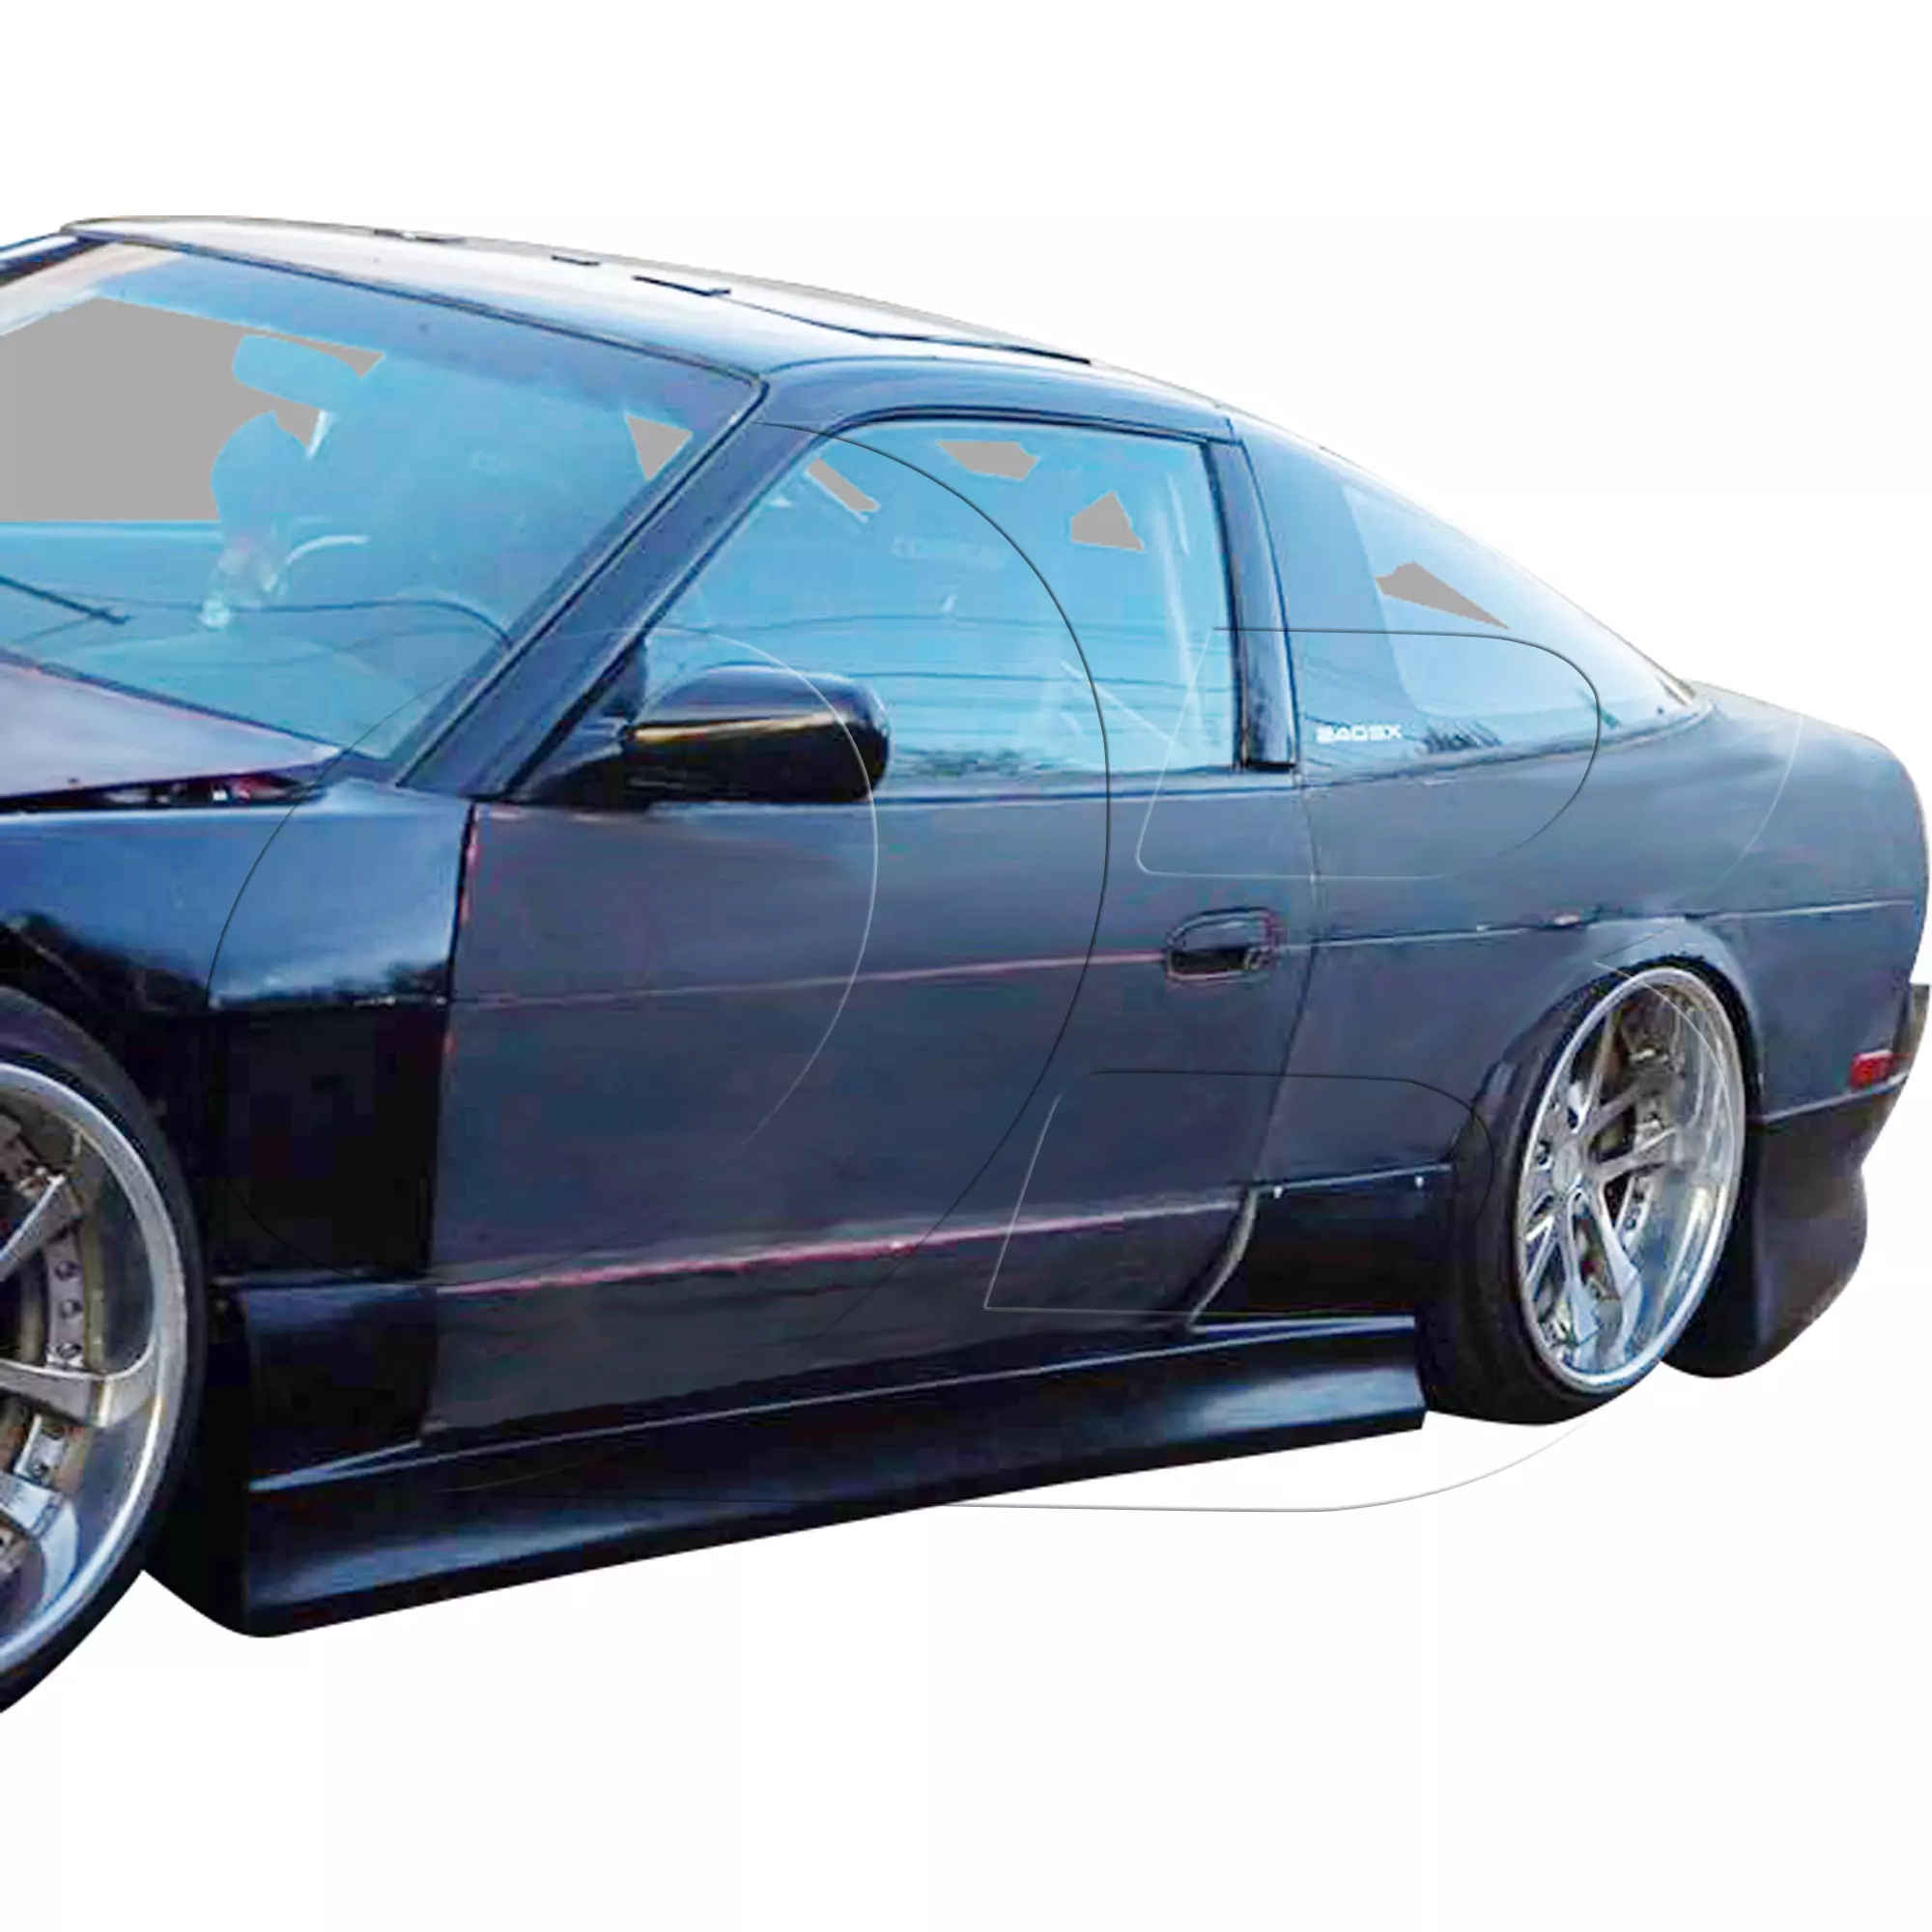 KBD Urethane Bsport2 Style 4pc Full Body Kit > Nissan 240SX 1989-1994 > 2dr Coupe - Image 77